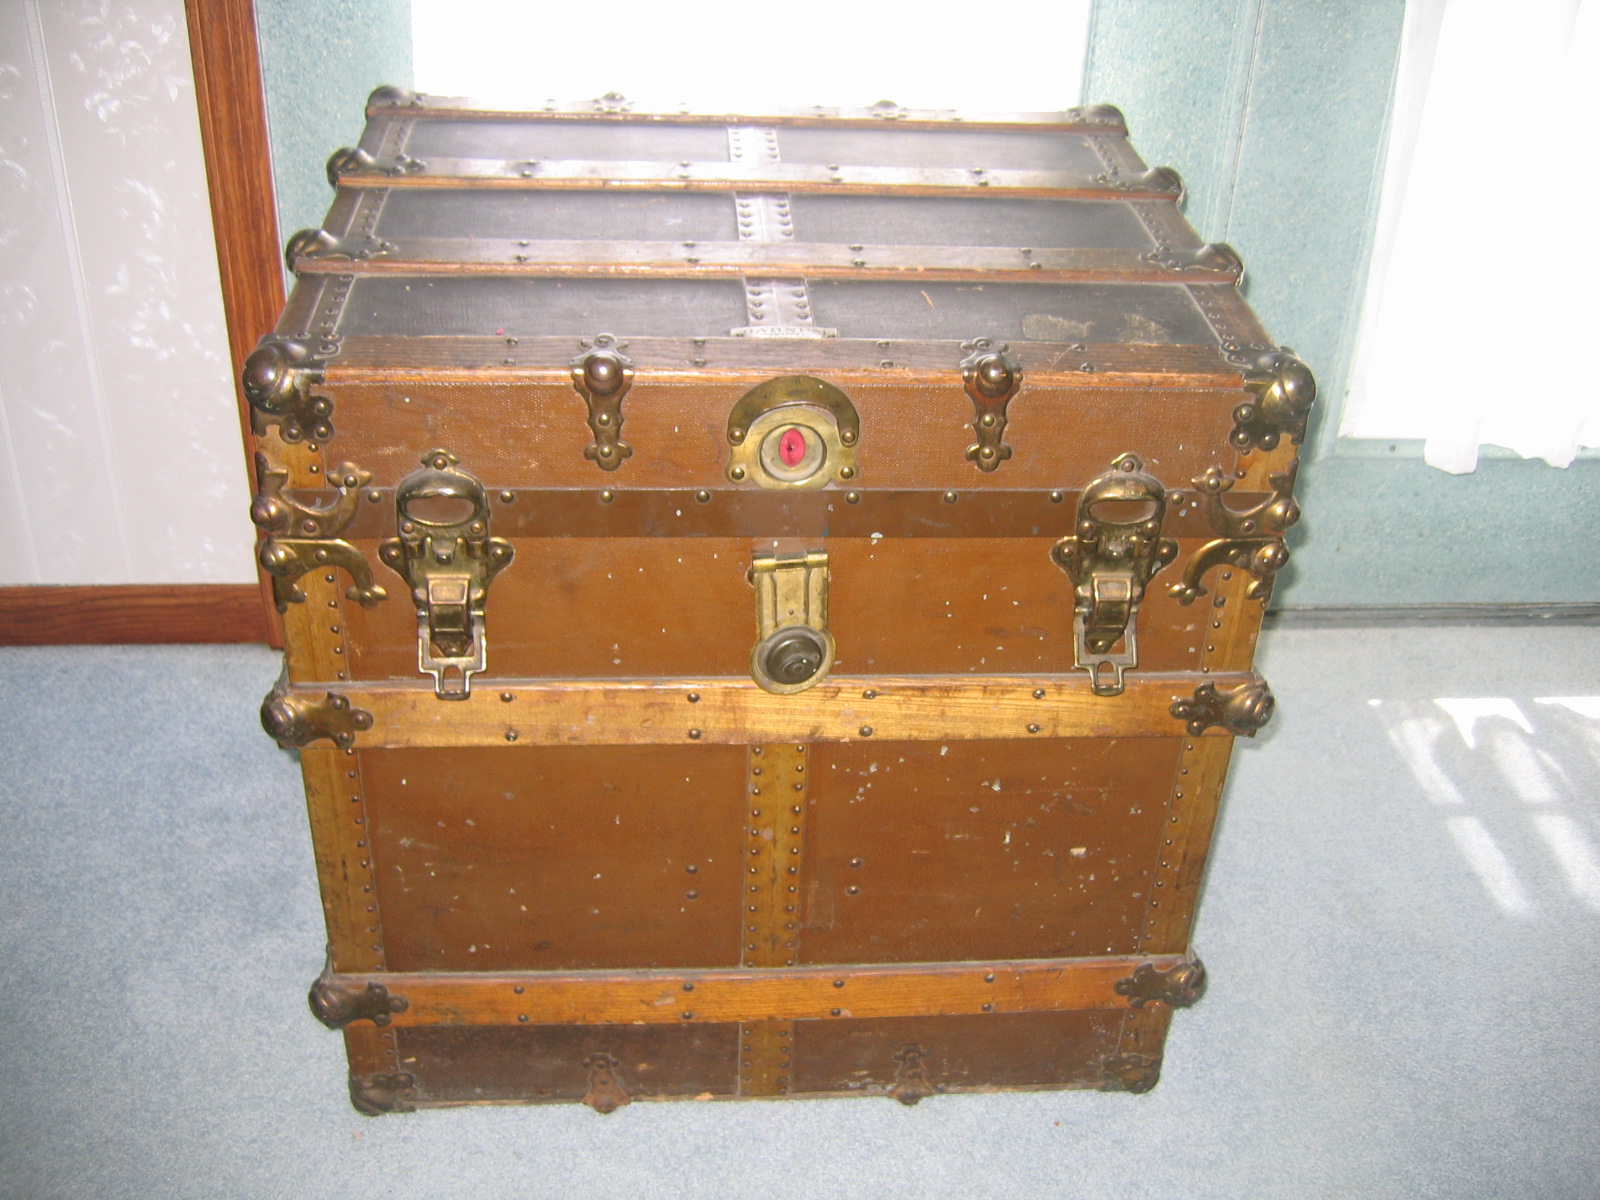 Antique Wooden Chest Travel Storage Trunk Item #305 For Sale | 0 | Classifieds